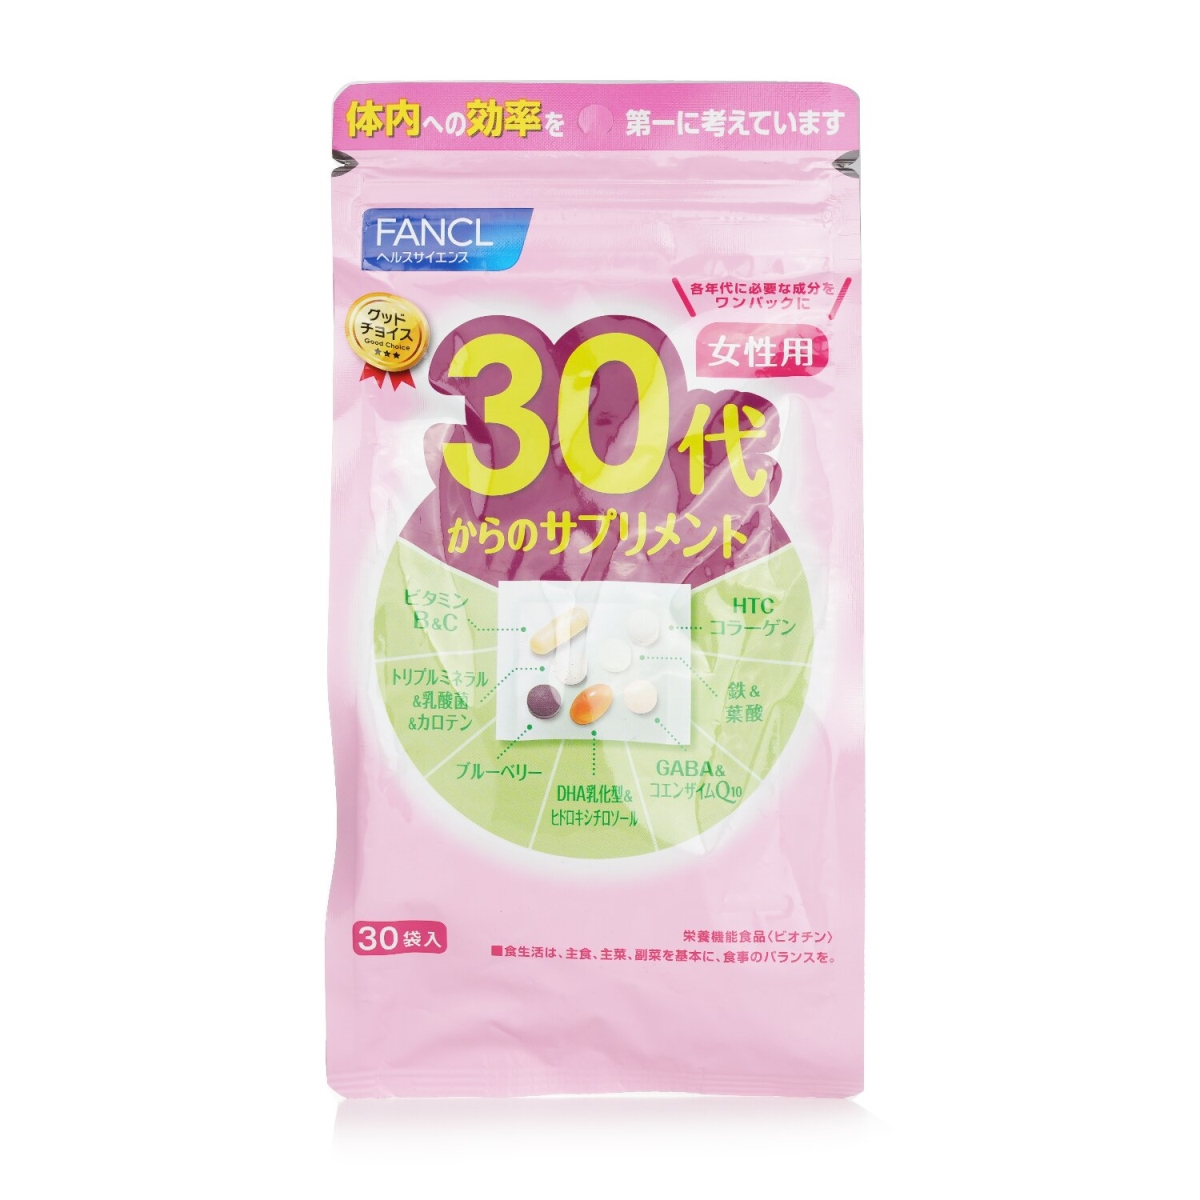 Picture of Fancl 281686 Good Choice 30s Women Health Supplement - 30 per Bag